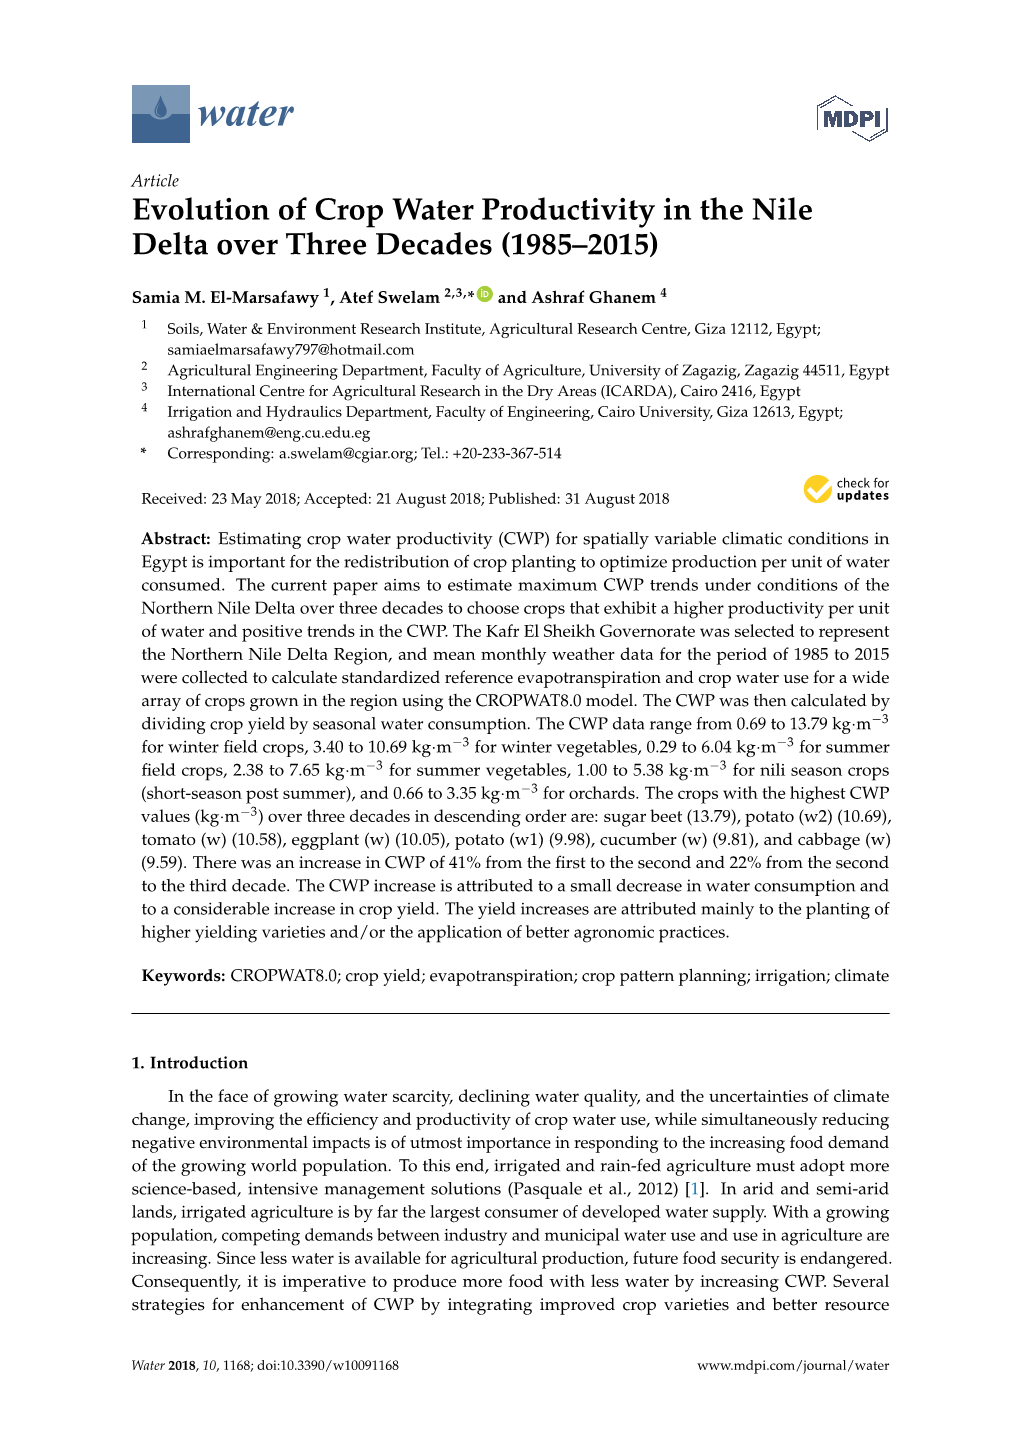 Evolution of Crop Water Productivity in the Nile Delta Over Three Decades (1985–2015)